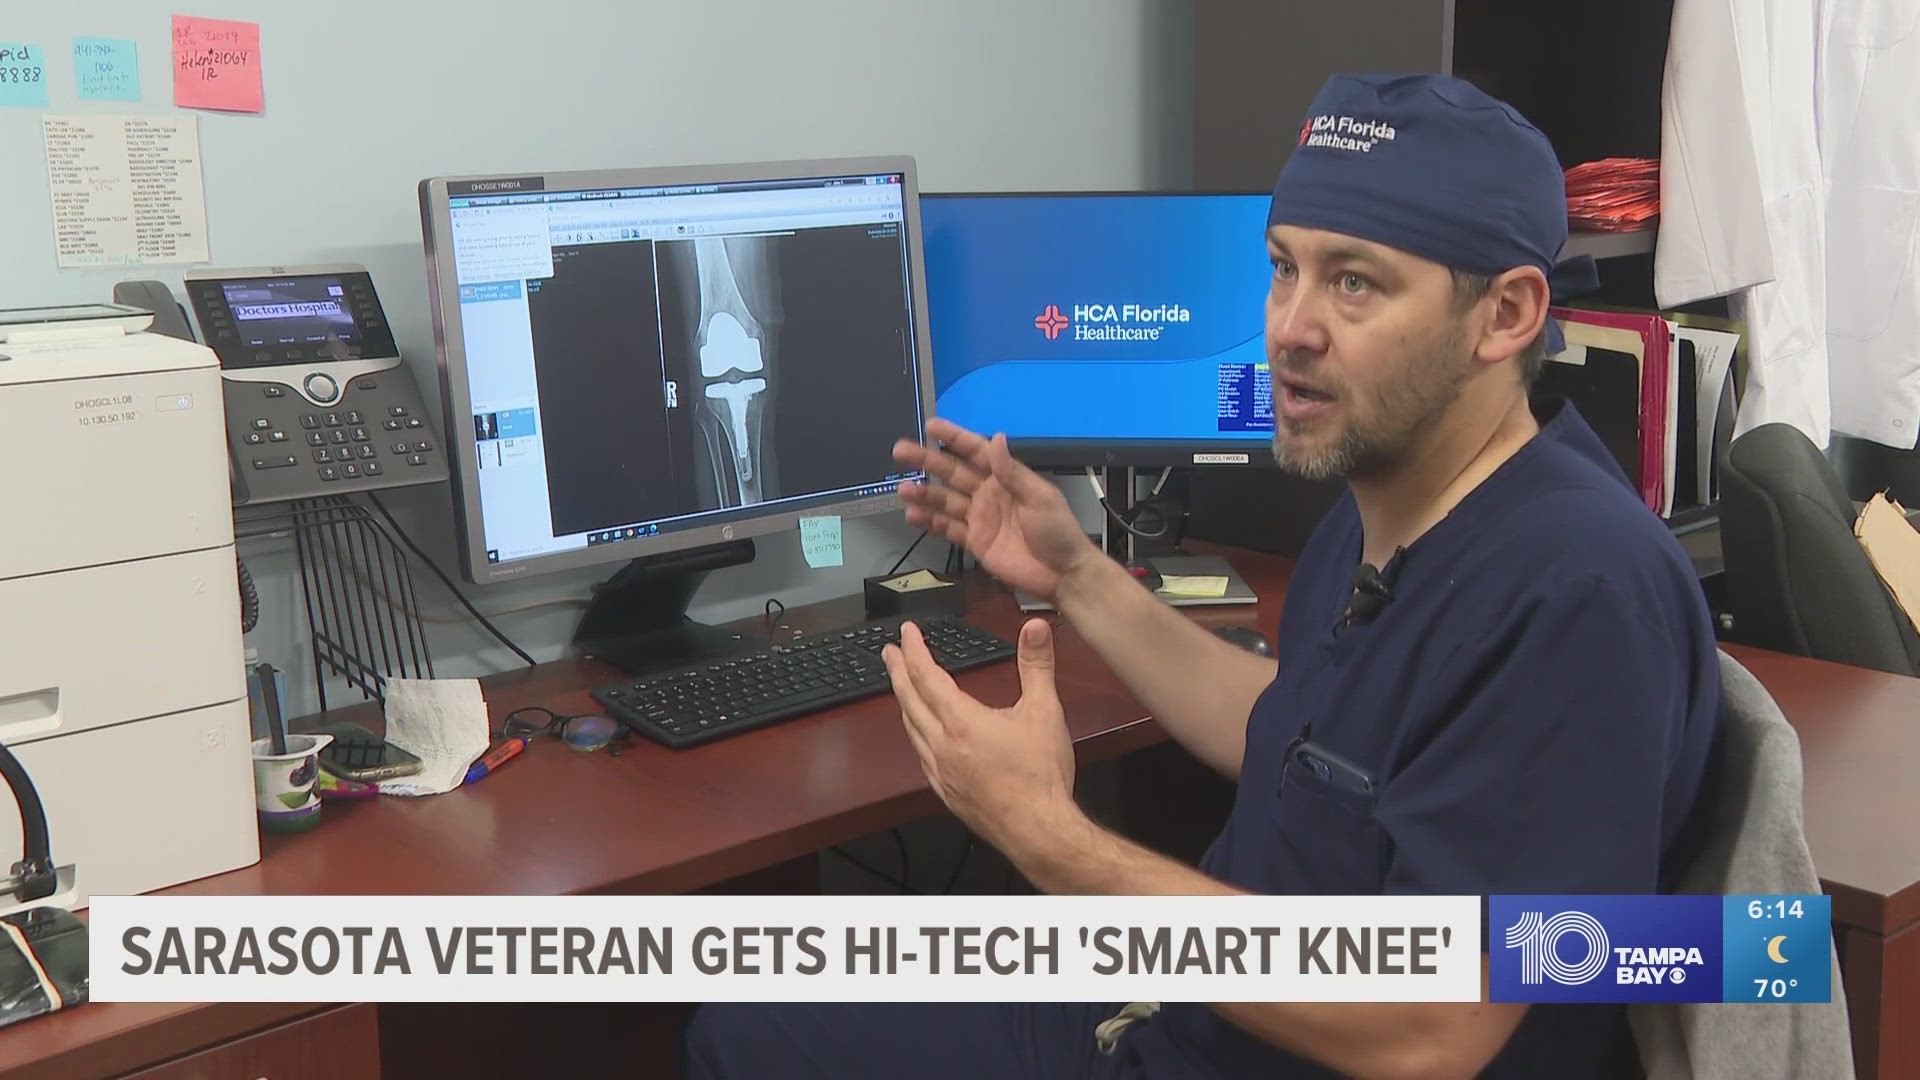 The smart knee works in tandem with a phone app that sends data based on the patient's movements.